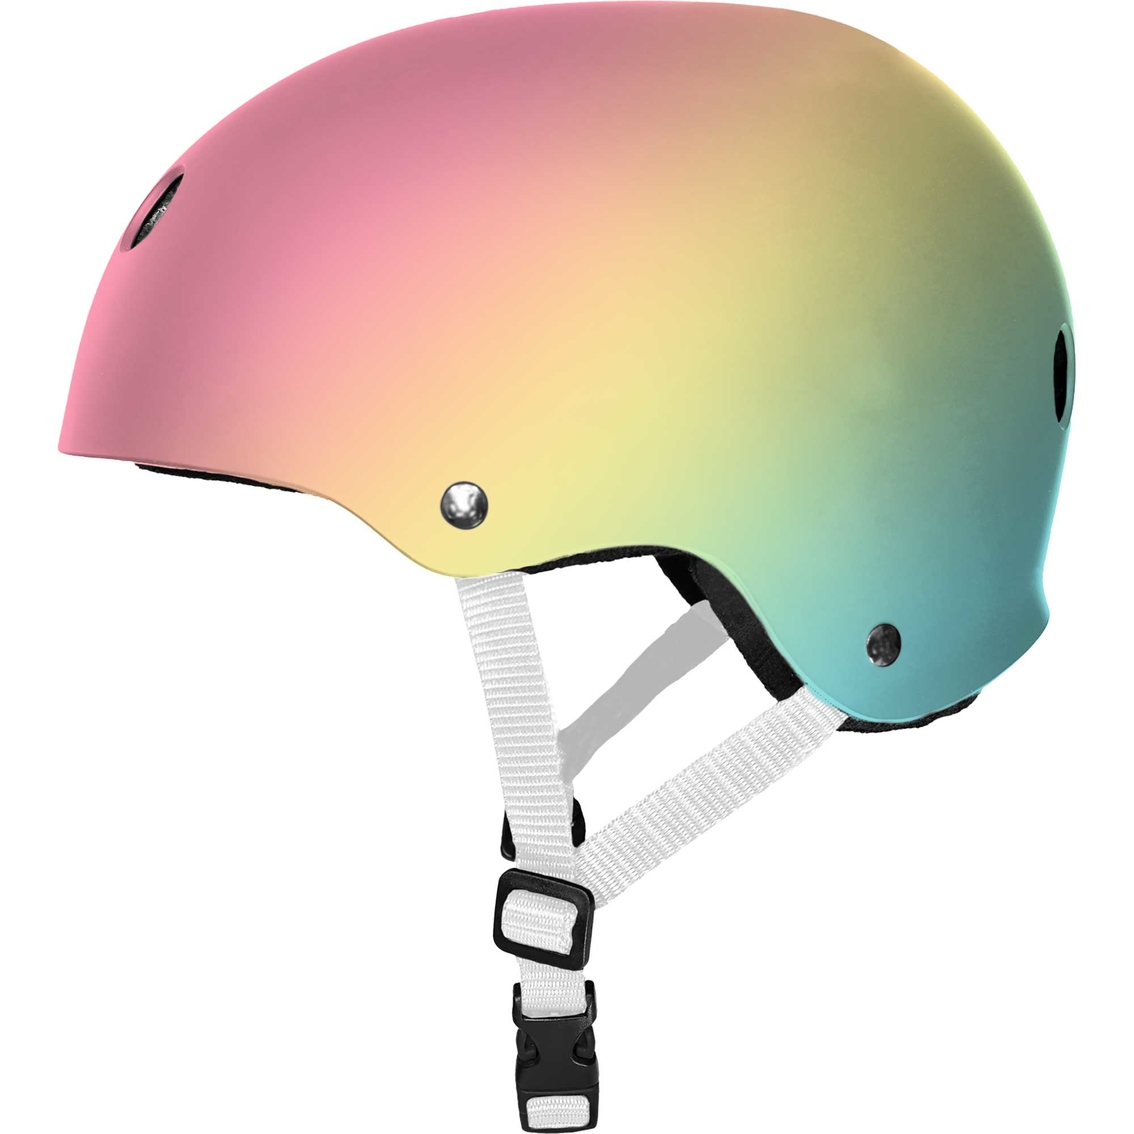 Triple 8 Eight Ball Dual Certified Youth Helmet - Image 2 of 3